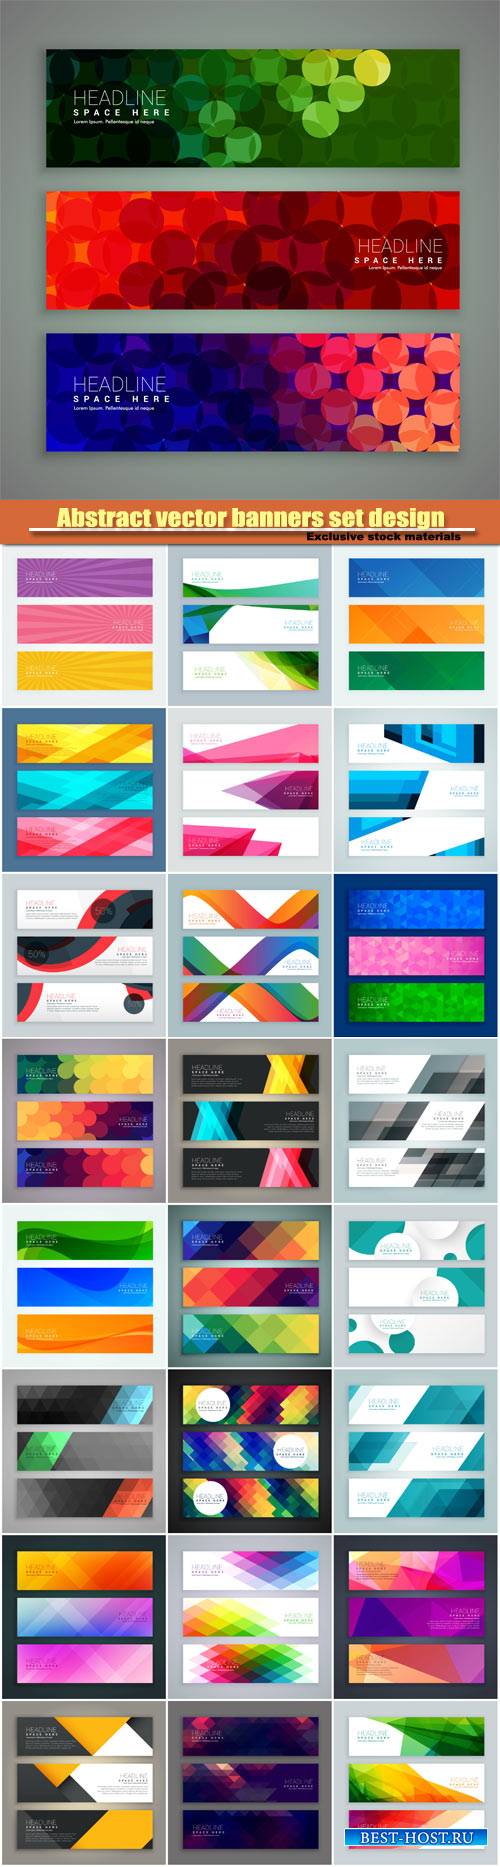 Abstract vector banners set design made with circles